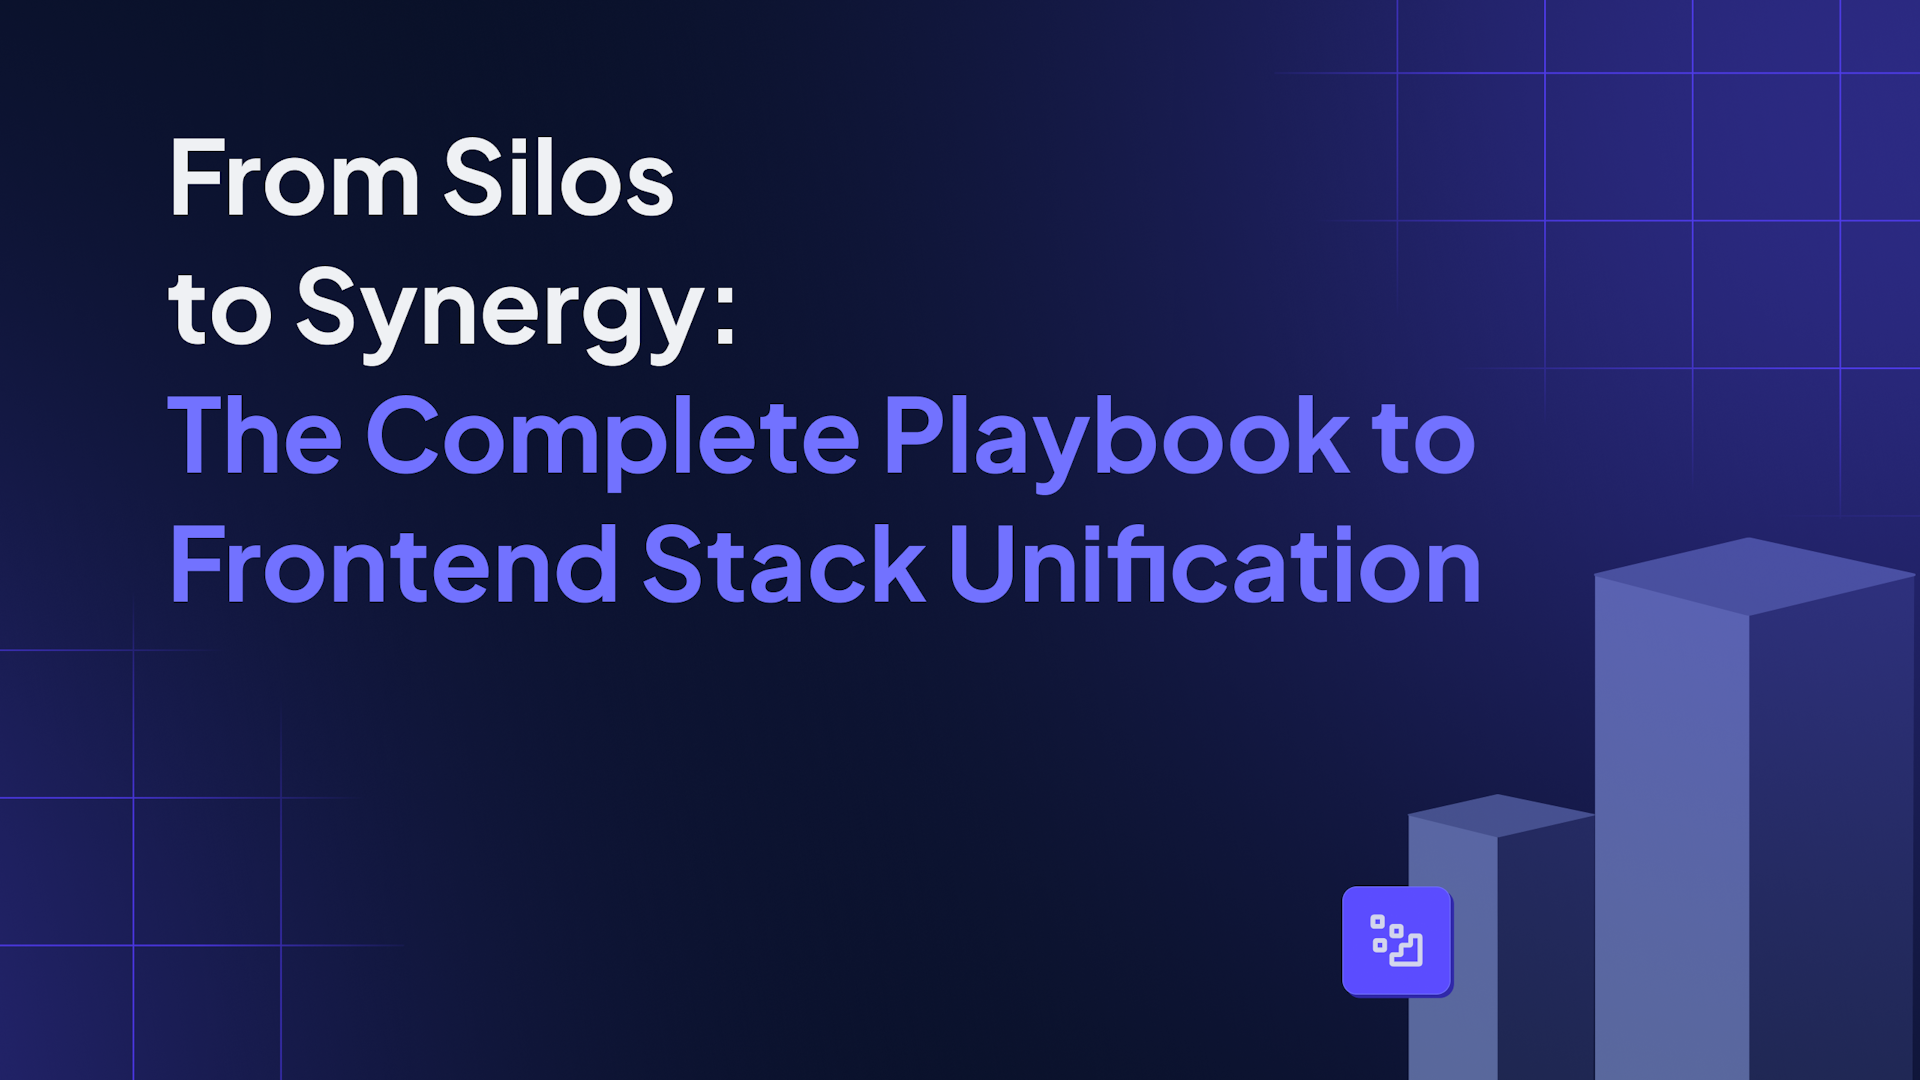 From Silos to Synergy: The Complete Playbook to Frontend Stack Unification